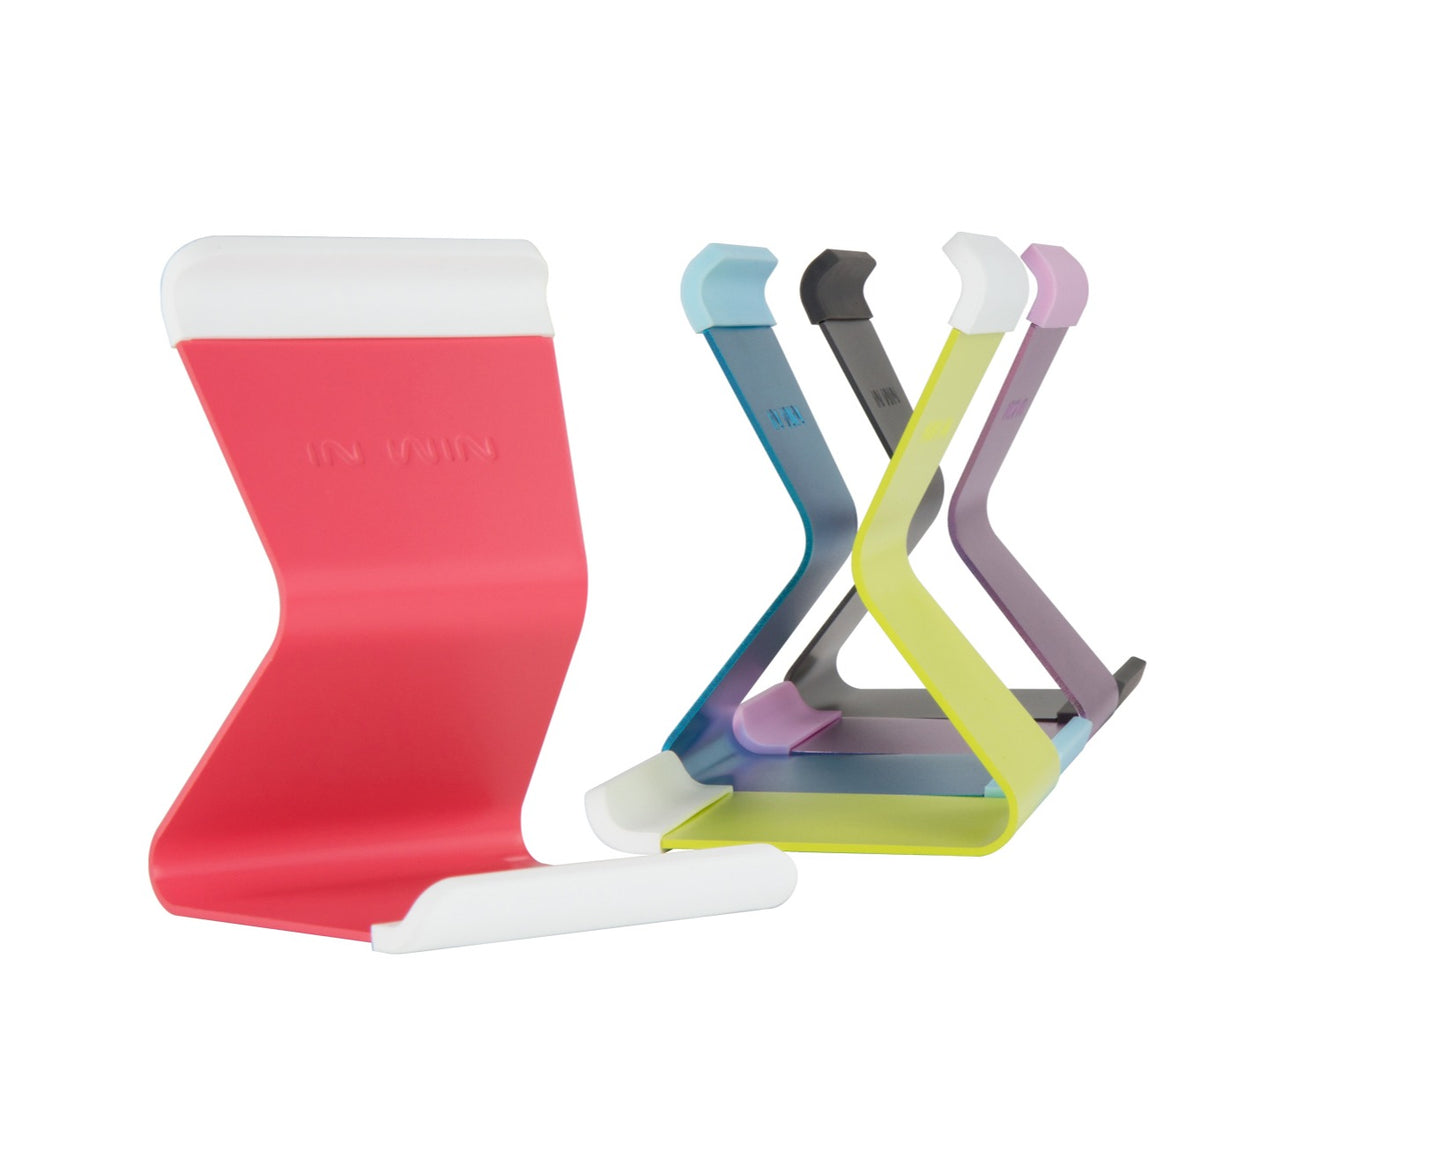 iSeat Mini (Tablet Stand)